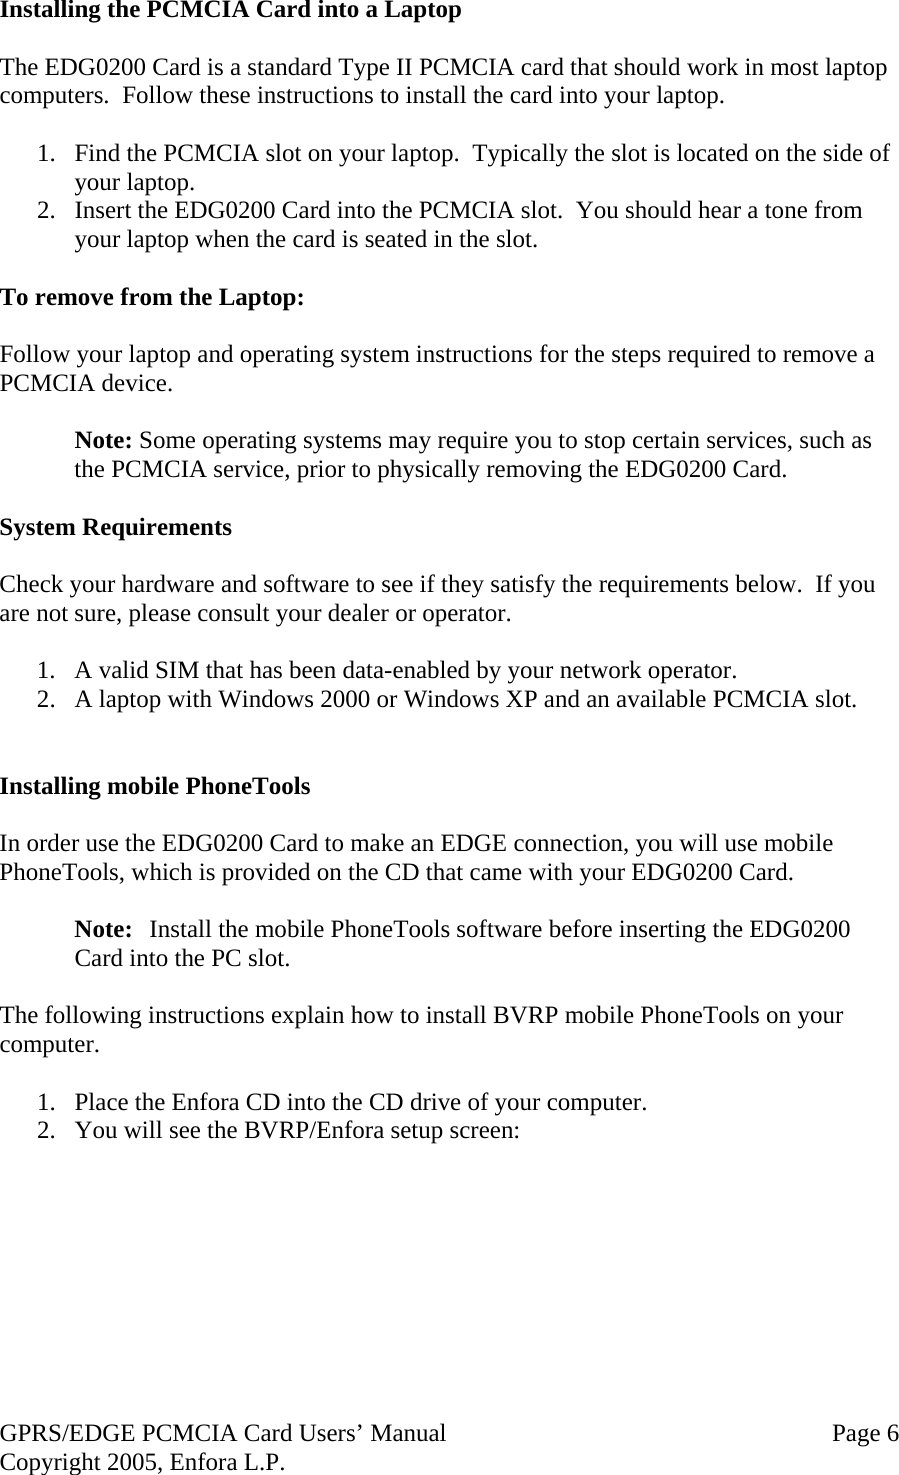 GPRS/EDGE PCMCIA Card Users’ Manual   Page 6 Copyright 2005, Enfora L.P. Installing the PCMCIA Card into a Laptop  The EDG0200 Card is a standard Type II PCMCIA card that should work in most laptop computers.  Follow these instructions to install the card into your laptop.  1.  Find the PCMCIA slot on your laptop.  Typically the slot is located on the side of your laptop. 2.  Insert the EDG0200 Card into the PCMCIA slot.  You should hear a tone from your laptop when the card is seated in the slot.  To remove from the Laptop:  Follow your laptop and operating system instructions for the steps required to remove a PCMCIA device.   Note: Some operating systems may require you to stop certain services, such as the PCMCIA service, prior to physically removing the EDG0200 Card.  System Requirements  Check your hardware and software to see if they satisfy the requirements below.  If you are not sure, please consult your dealer or operator.  1.  A valid SIM that has been data-enabled by your network operator. 2.  A laptop with Windows 2000 or Windows XP and an available PCMCIA slot.   Installing mobile PhoneTools  In order use the EDG0200 Card to make an EDGE connection, you will use mobile PhoneTools, which is provided on the CD that came with your EDG0200 Card.    Note:  Install the mobile PhoneTools software before inserting the EDG0200 Card into the PC slot.  The following instructions explain how to install BVRP mobile PhoneTools on your computer.  1.  Place the Enfora CD into the CD drive of your computer. 2.  You will see the BVRP/Enfora setup screen:    